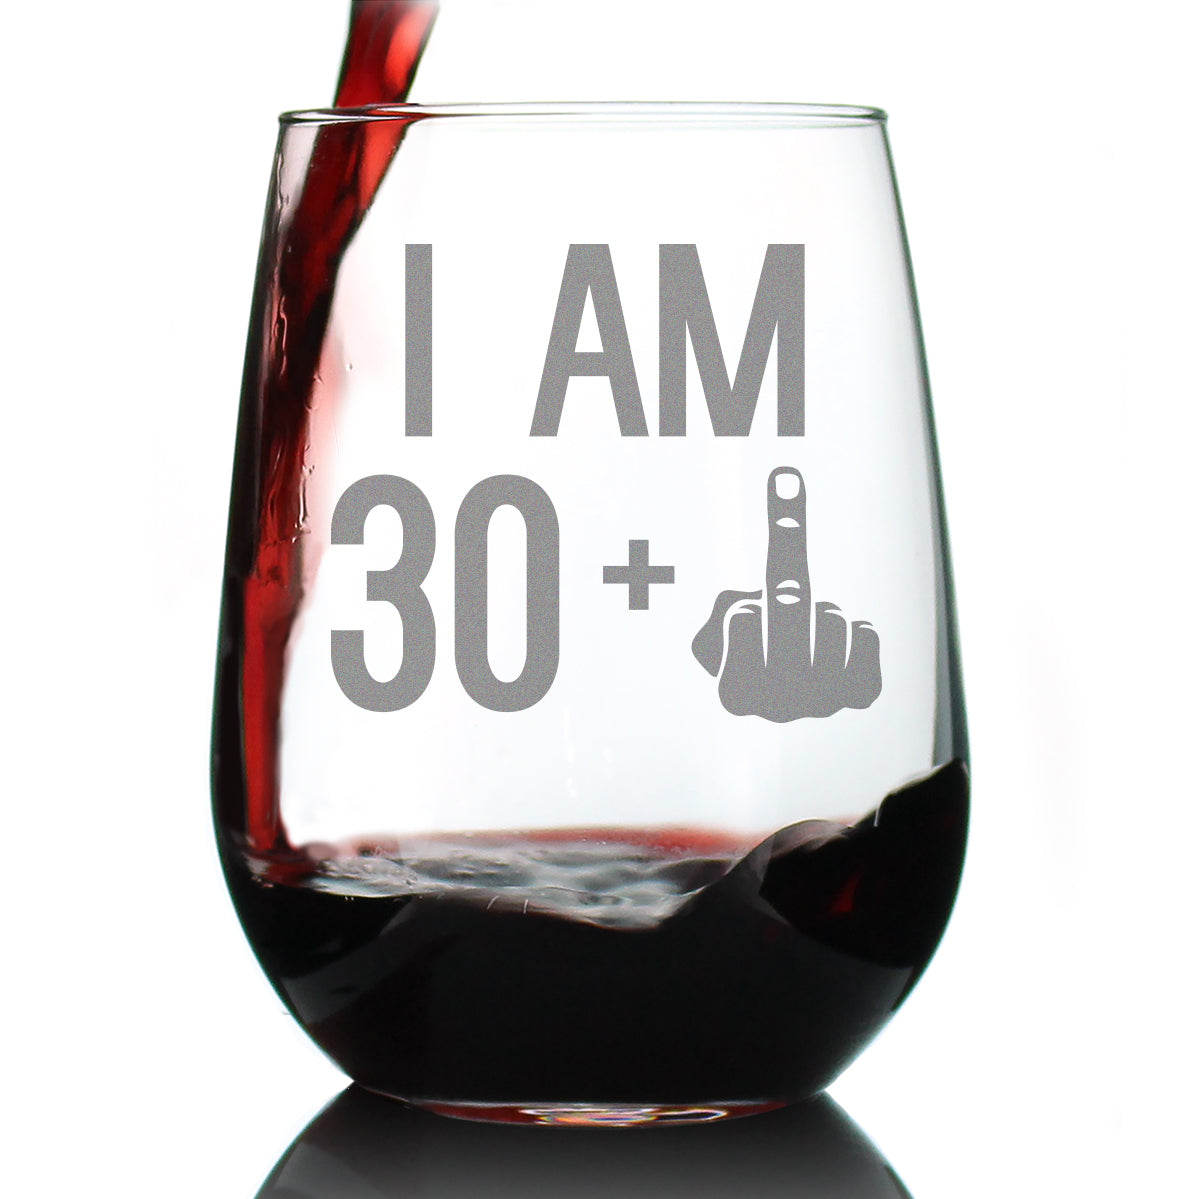 30 + 1 Middle Finger - 31st Birthday Stemless Wine Glass for Women &amp; Men - Cute Funny Wine Gift Idea - Unique Personalized Bday Glasses for Best Friend Turning 31 - Drinking Party Decoration